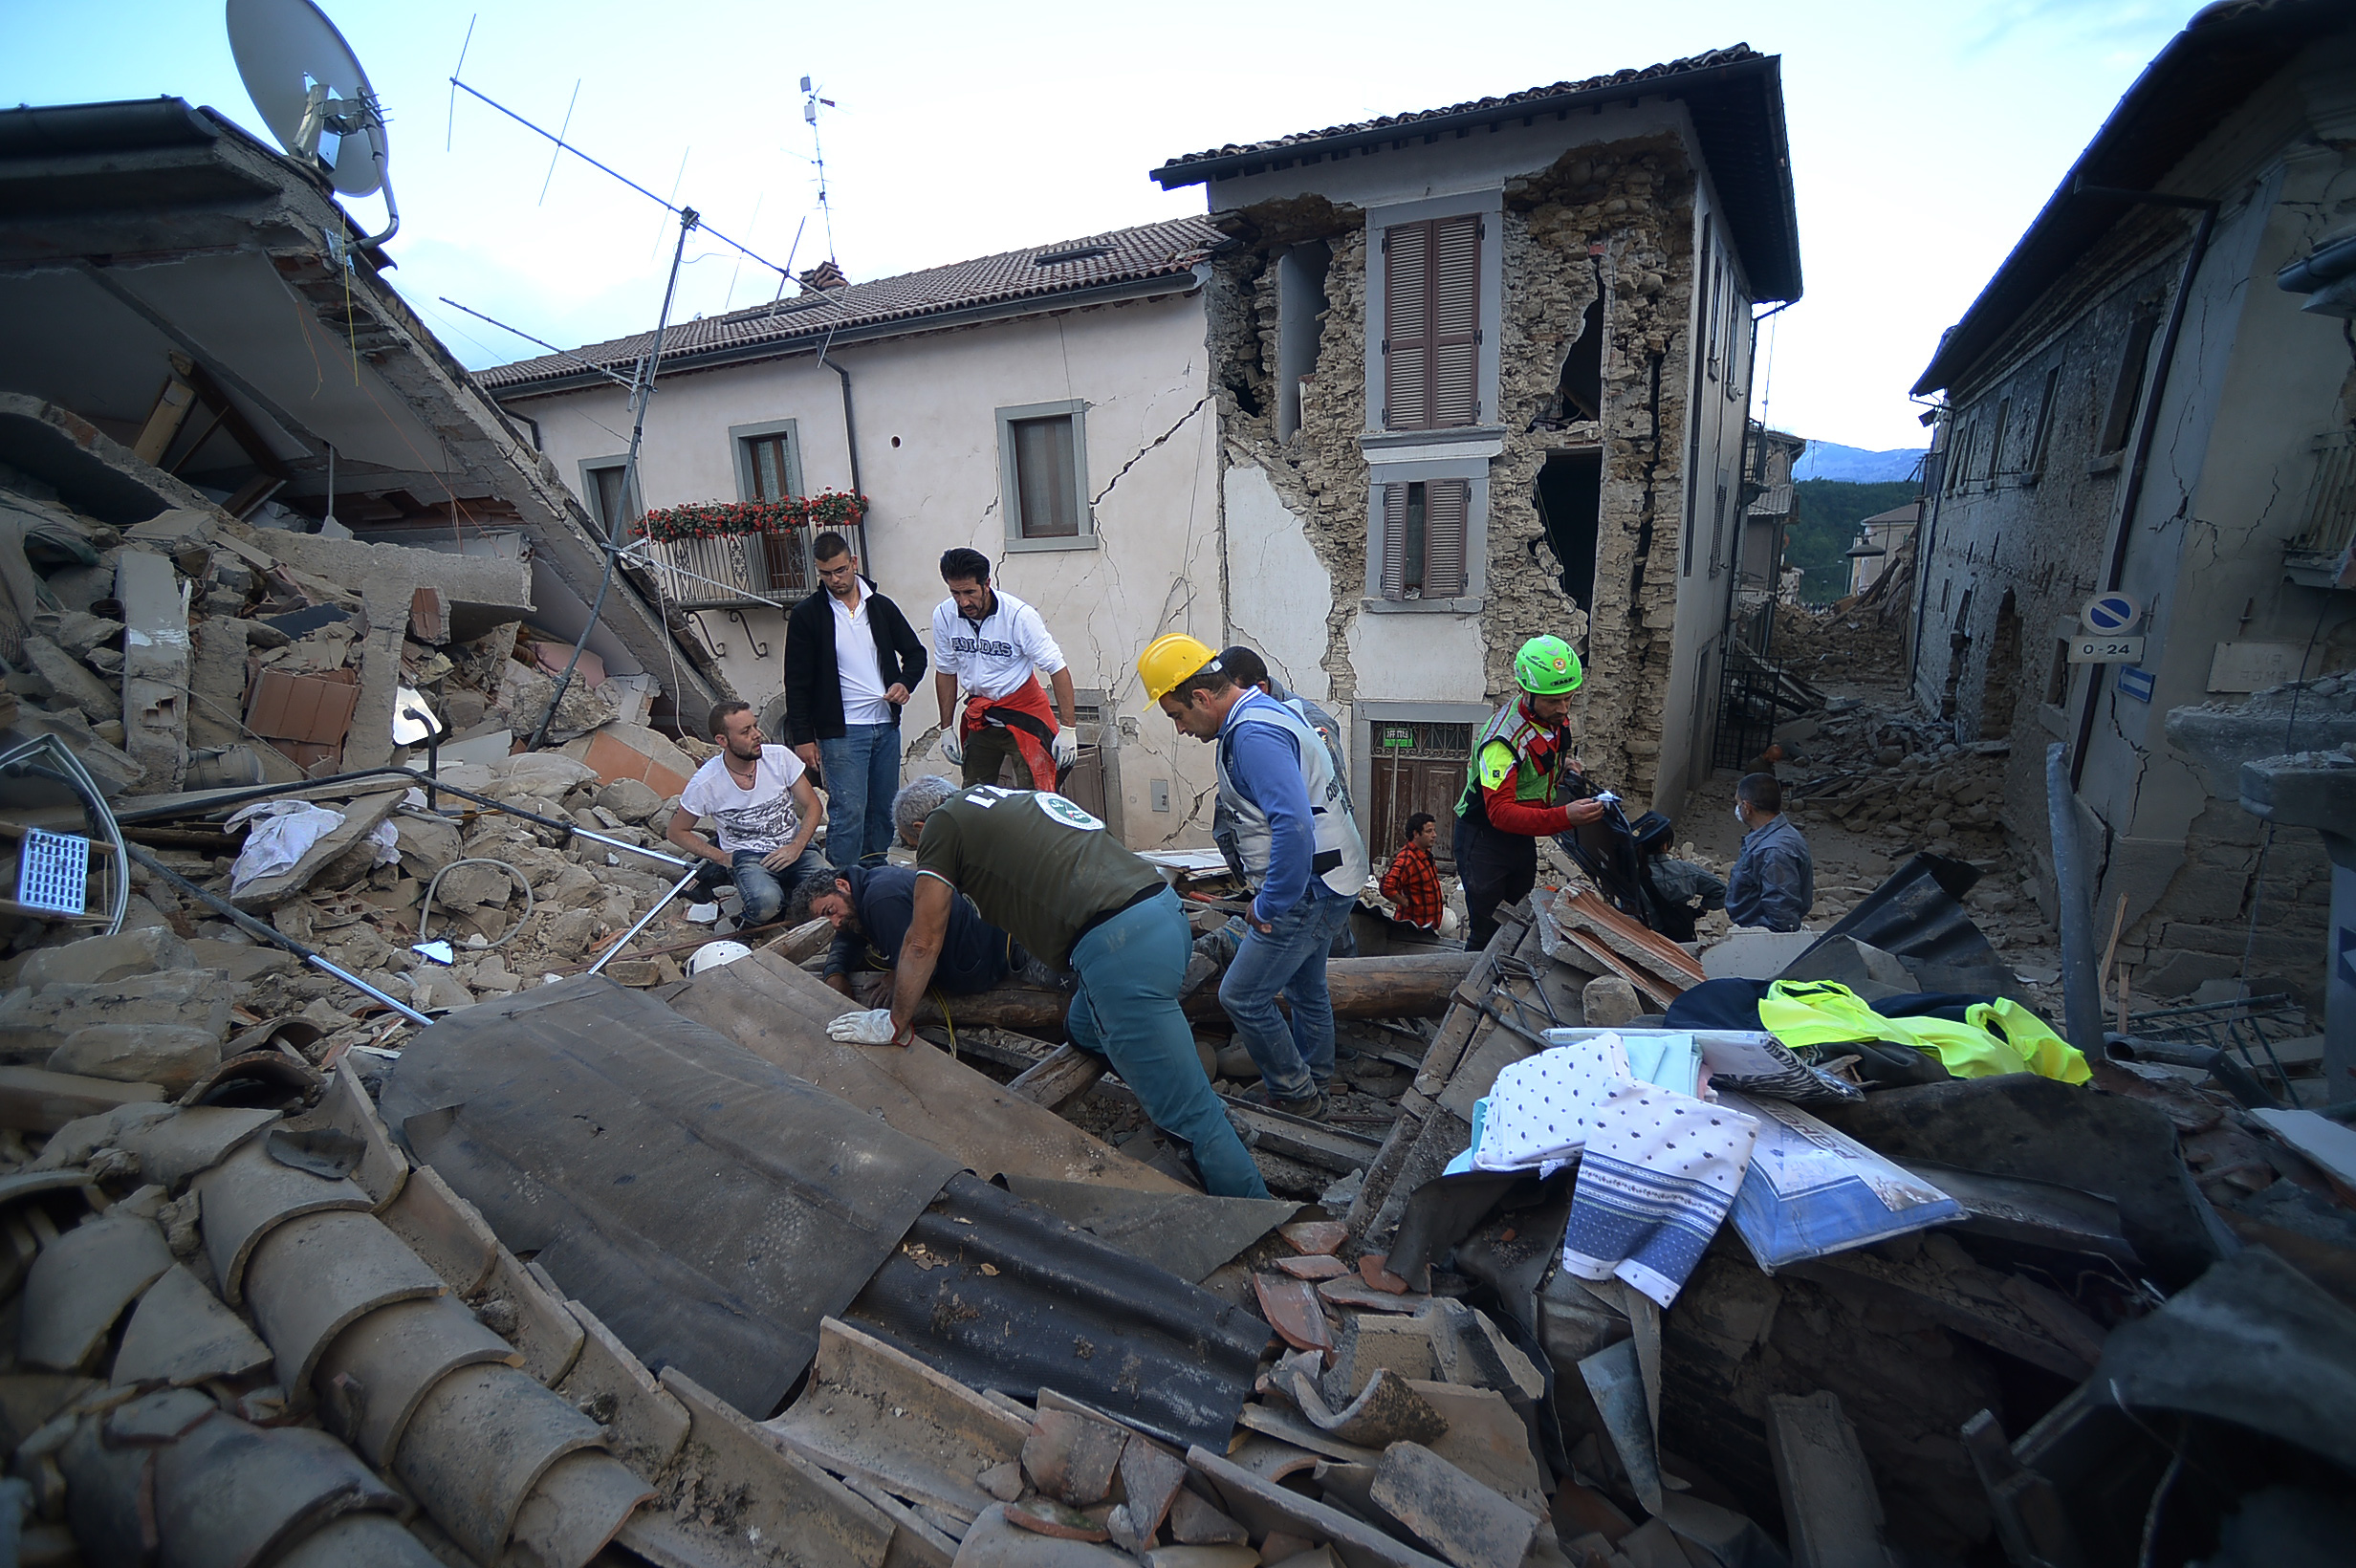 Rescuers search for victims among damaged buildings after a strong heartquake hit Amatrice on August 24, 2016. Central Italy was struck by a powerful, 6.2-magnitude earthquake in the early hours, which has killed at least three people and devastated dozens of mountain villages. Numerous buildings had collapsed in communities close to the epicenter of the quake near the town of Norcia in the region of Umbria, witnesses told Italian media, with an increase in the death toll highly likely. / AFP PHOTO / FILIPPO MONTEFORTE